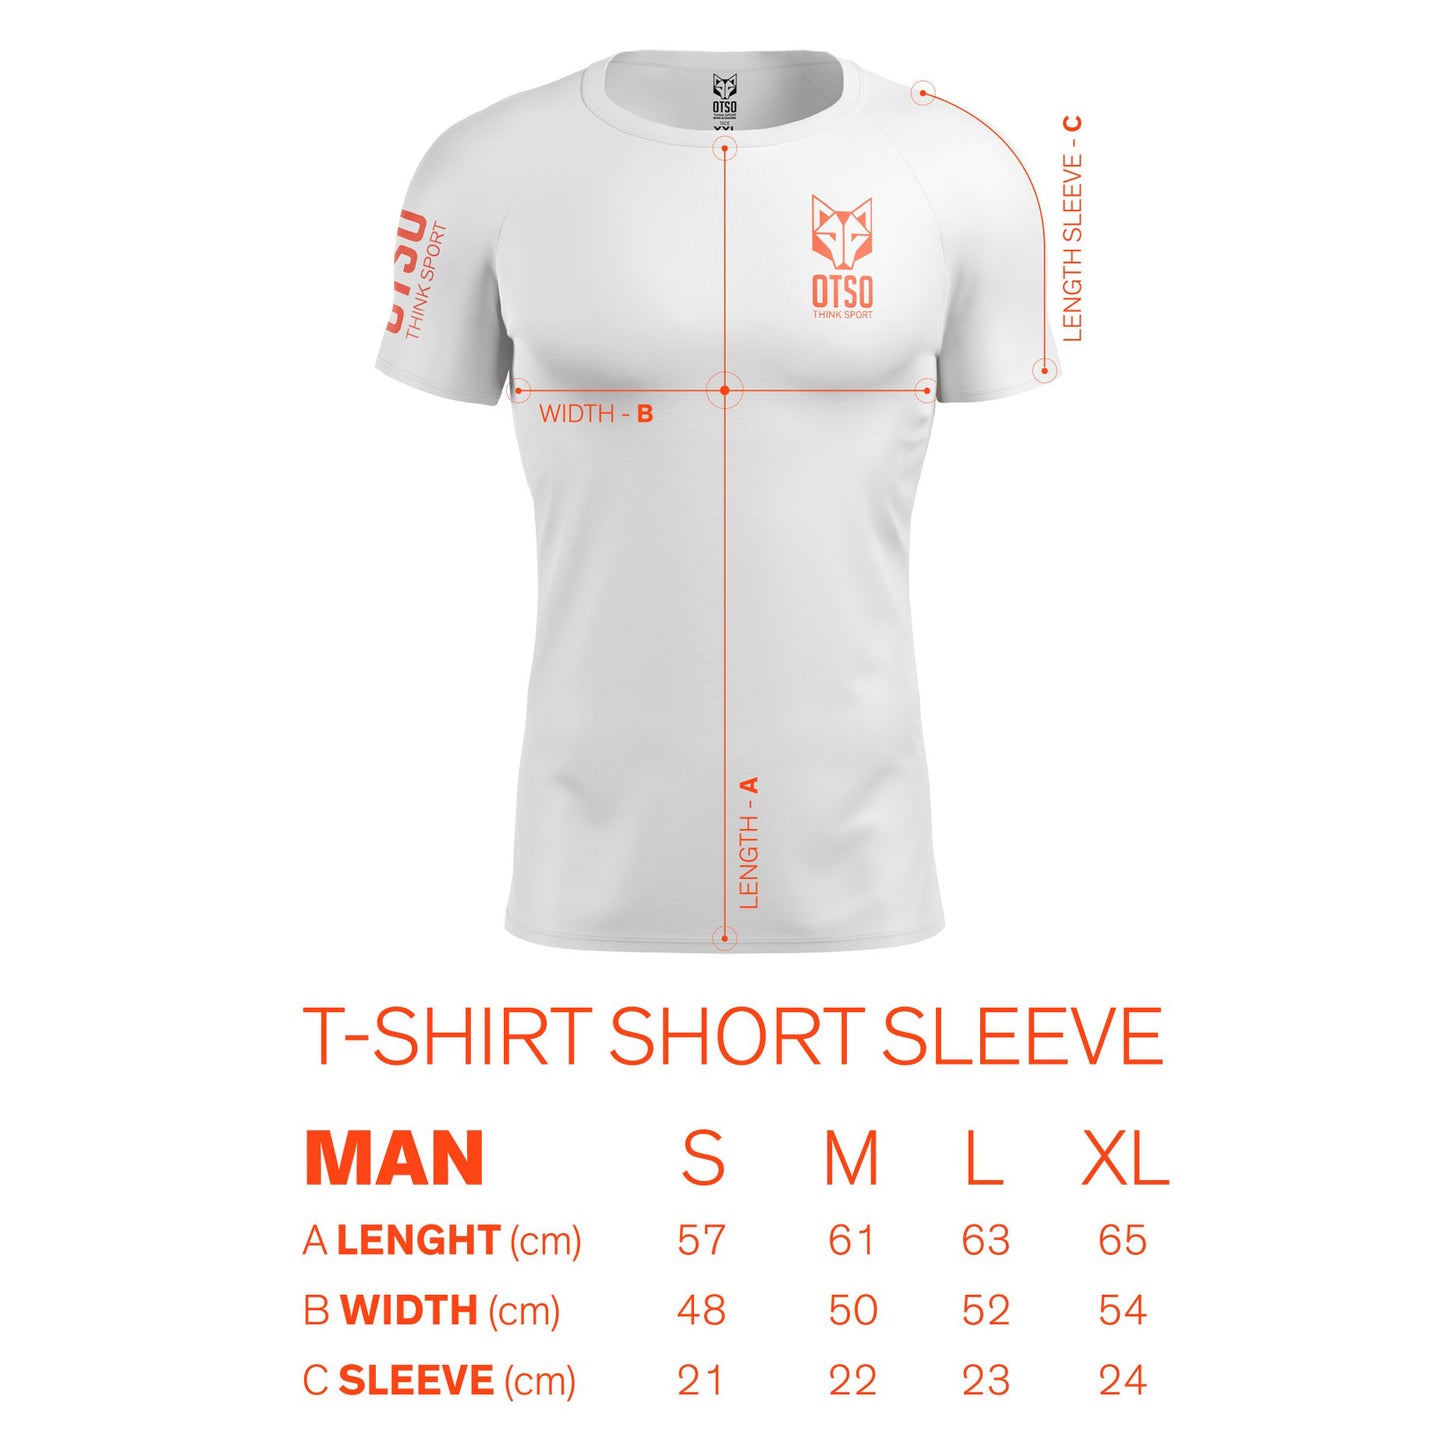 Camiseta manga corta hombre - Be Smart & Protect Your Heart (Outlet)